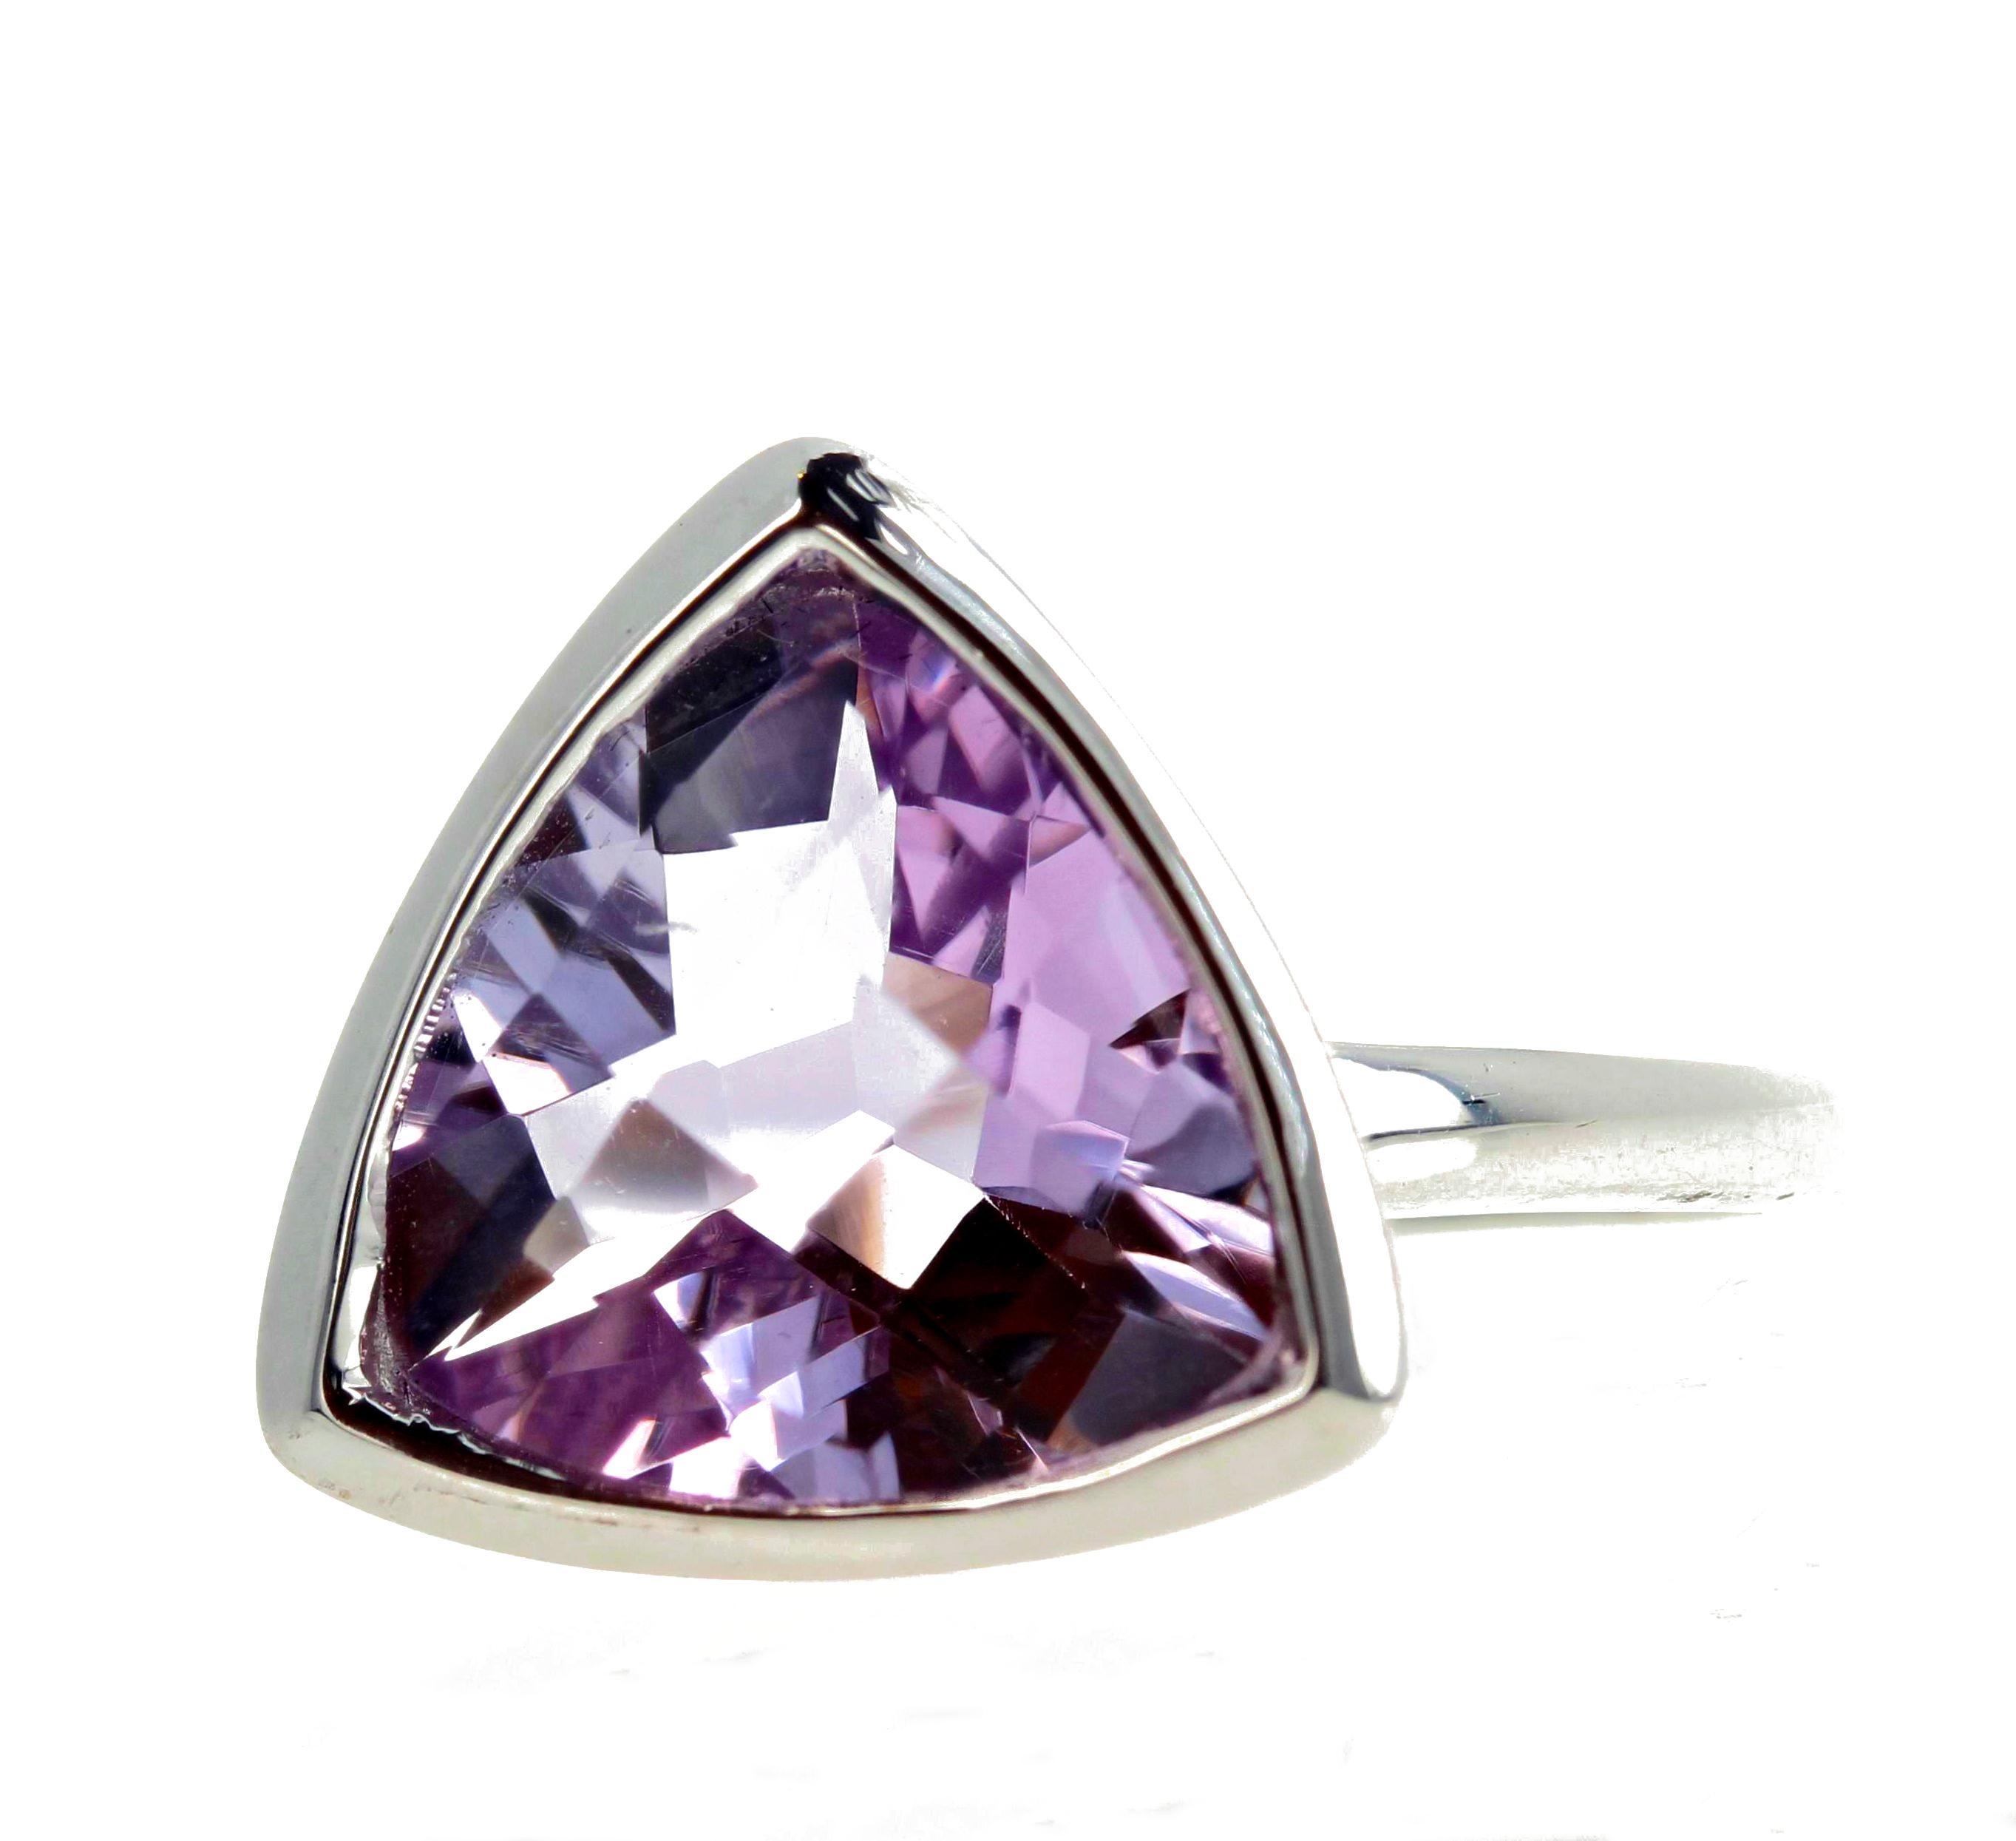 This beautiful checkerboard gem cut 7 carat pinky lilac Amethyst - Rose of France - is set in a Rhodium plated sterling silver ring size 8 3/4 (sizable for free).  It is unusual and unique the way it is set up high so it glitters beautifully and